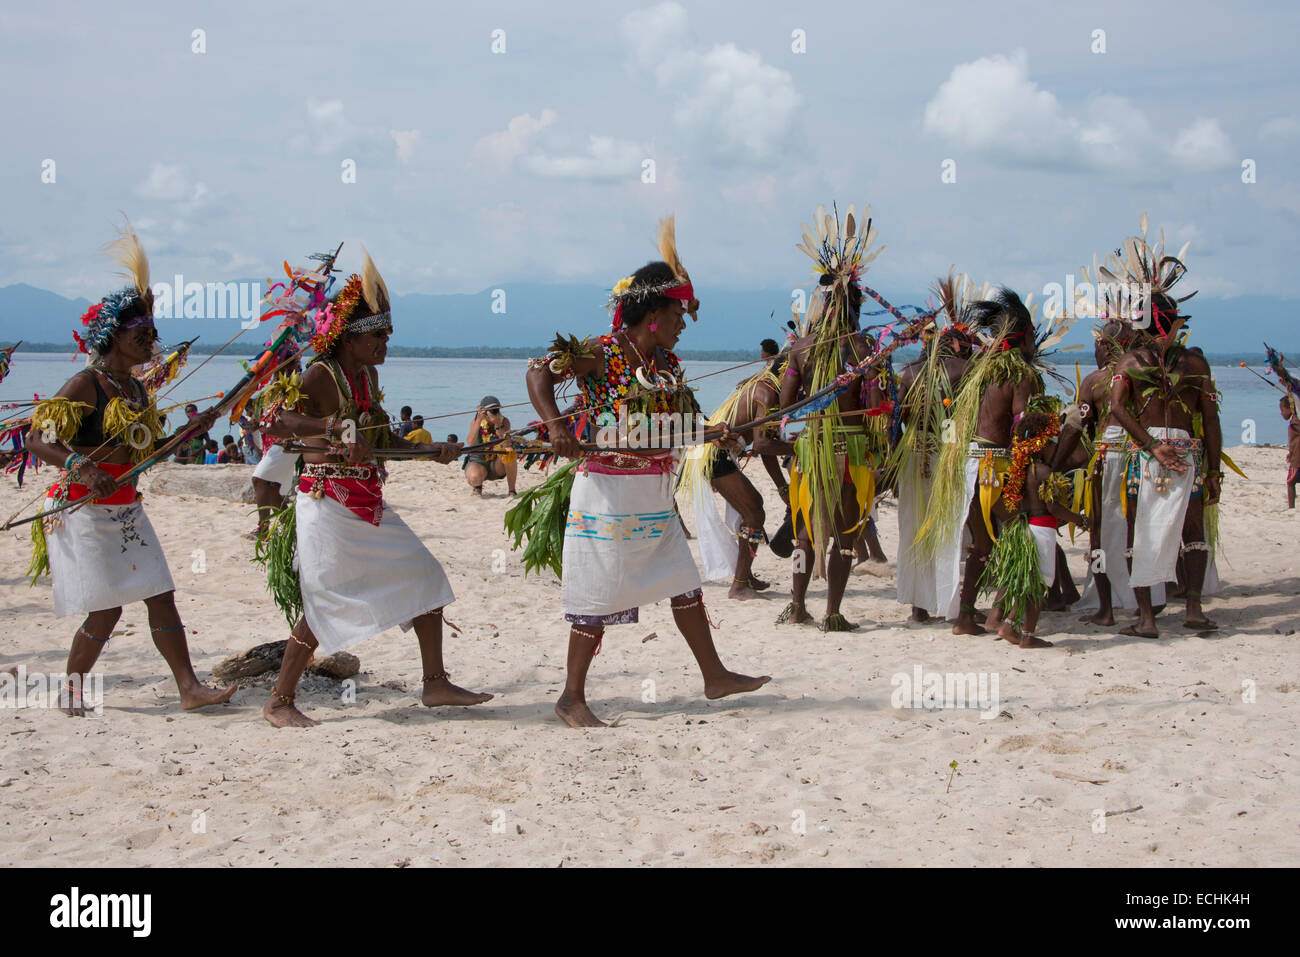 Melanesia, New Guinea, Papua New Guinea. Small island of Ali off the coast of mainland PNG. Local villagers dancing on beach. Stock Photo